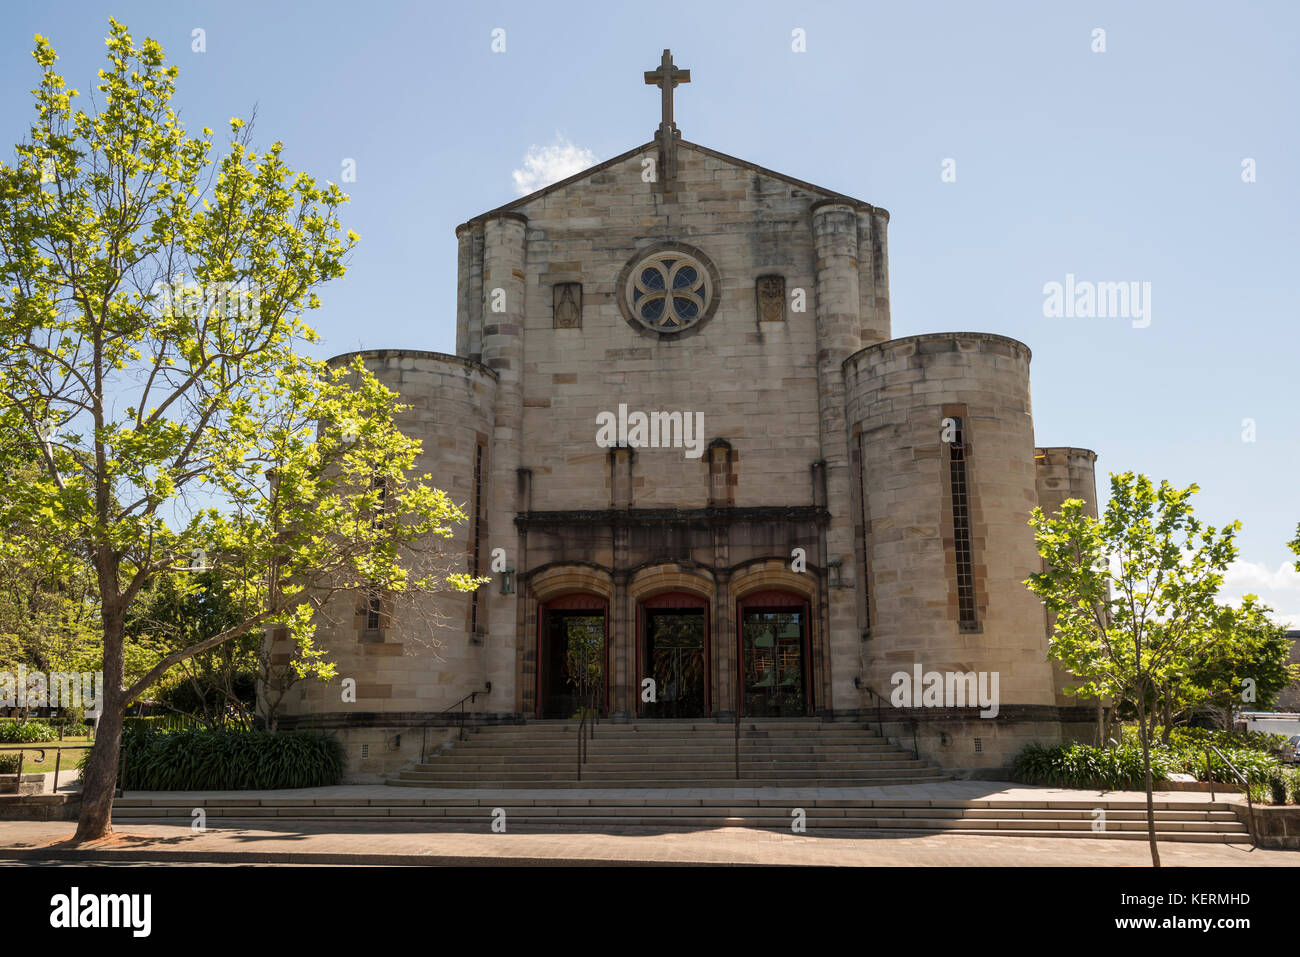 St Mary's Catholic Church, North Sydney, Australie Banque D'Images